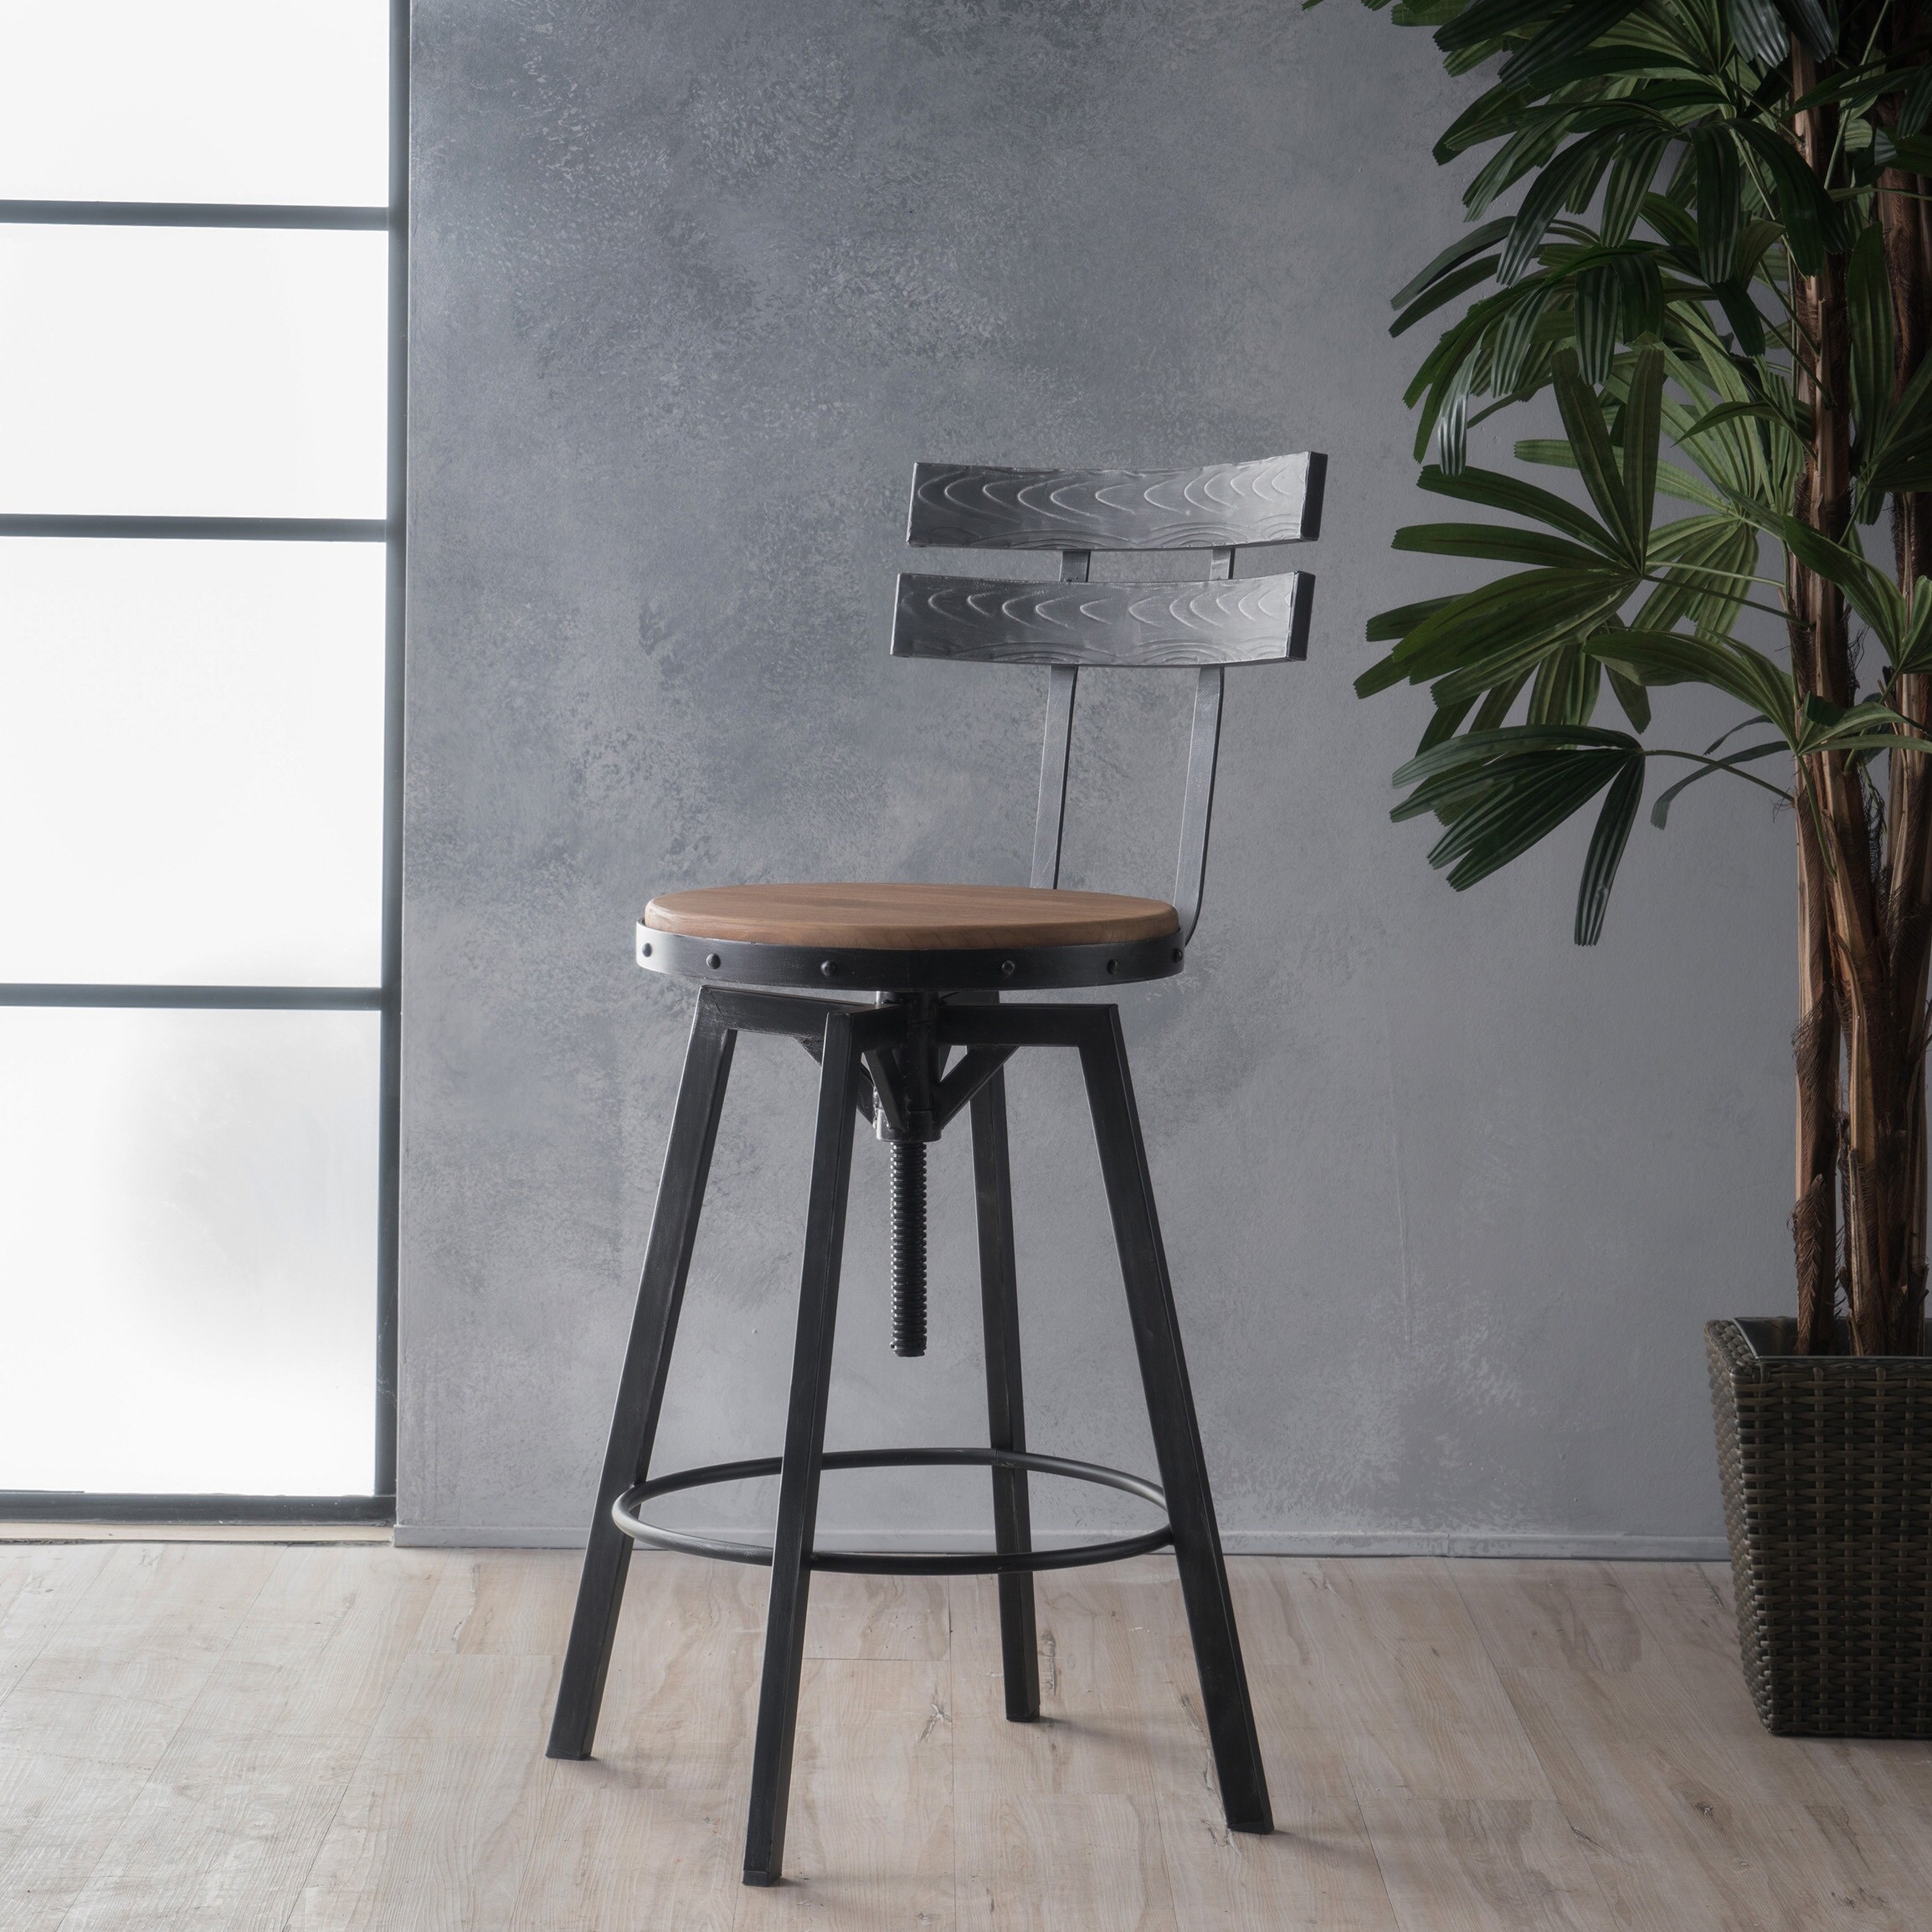 26 inch bar stools with low back